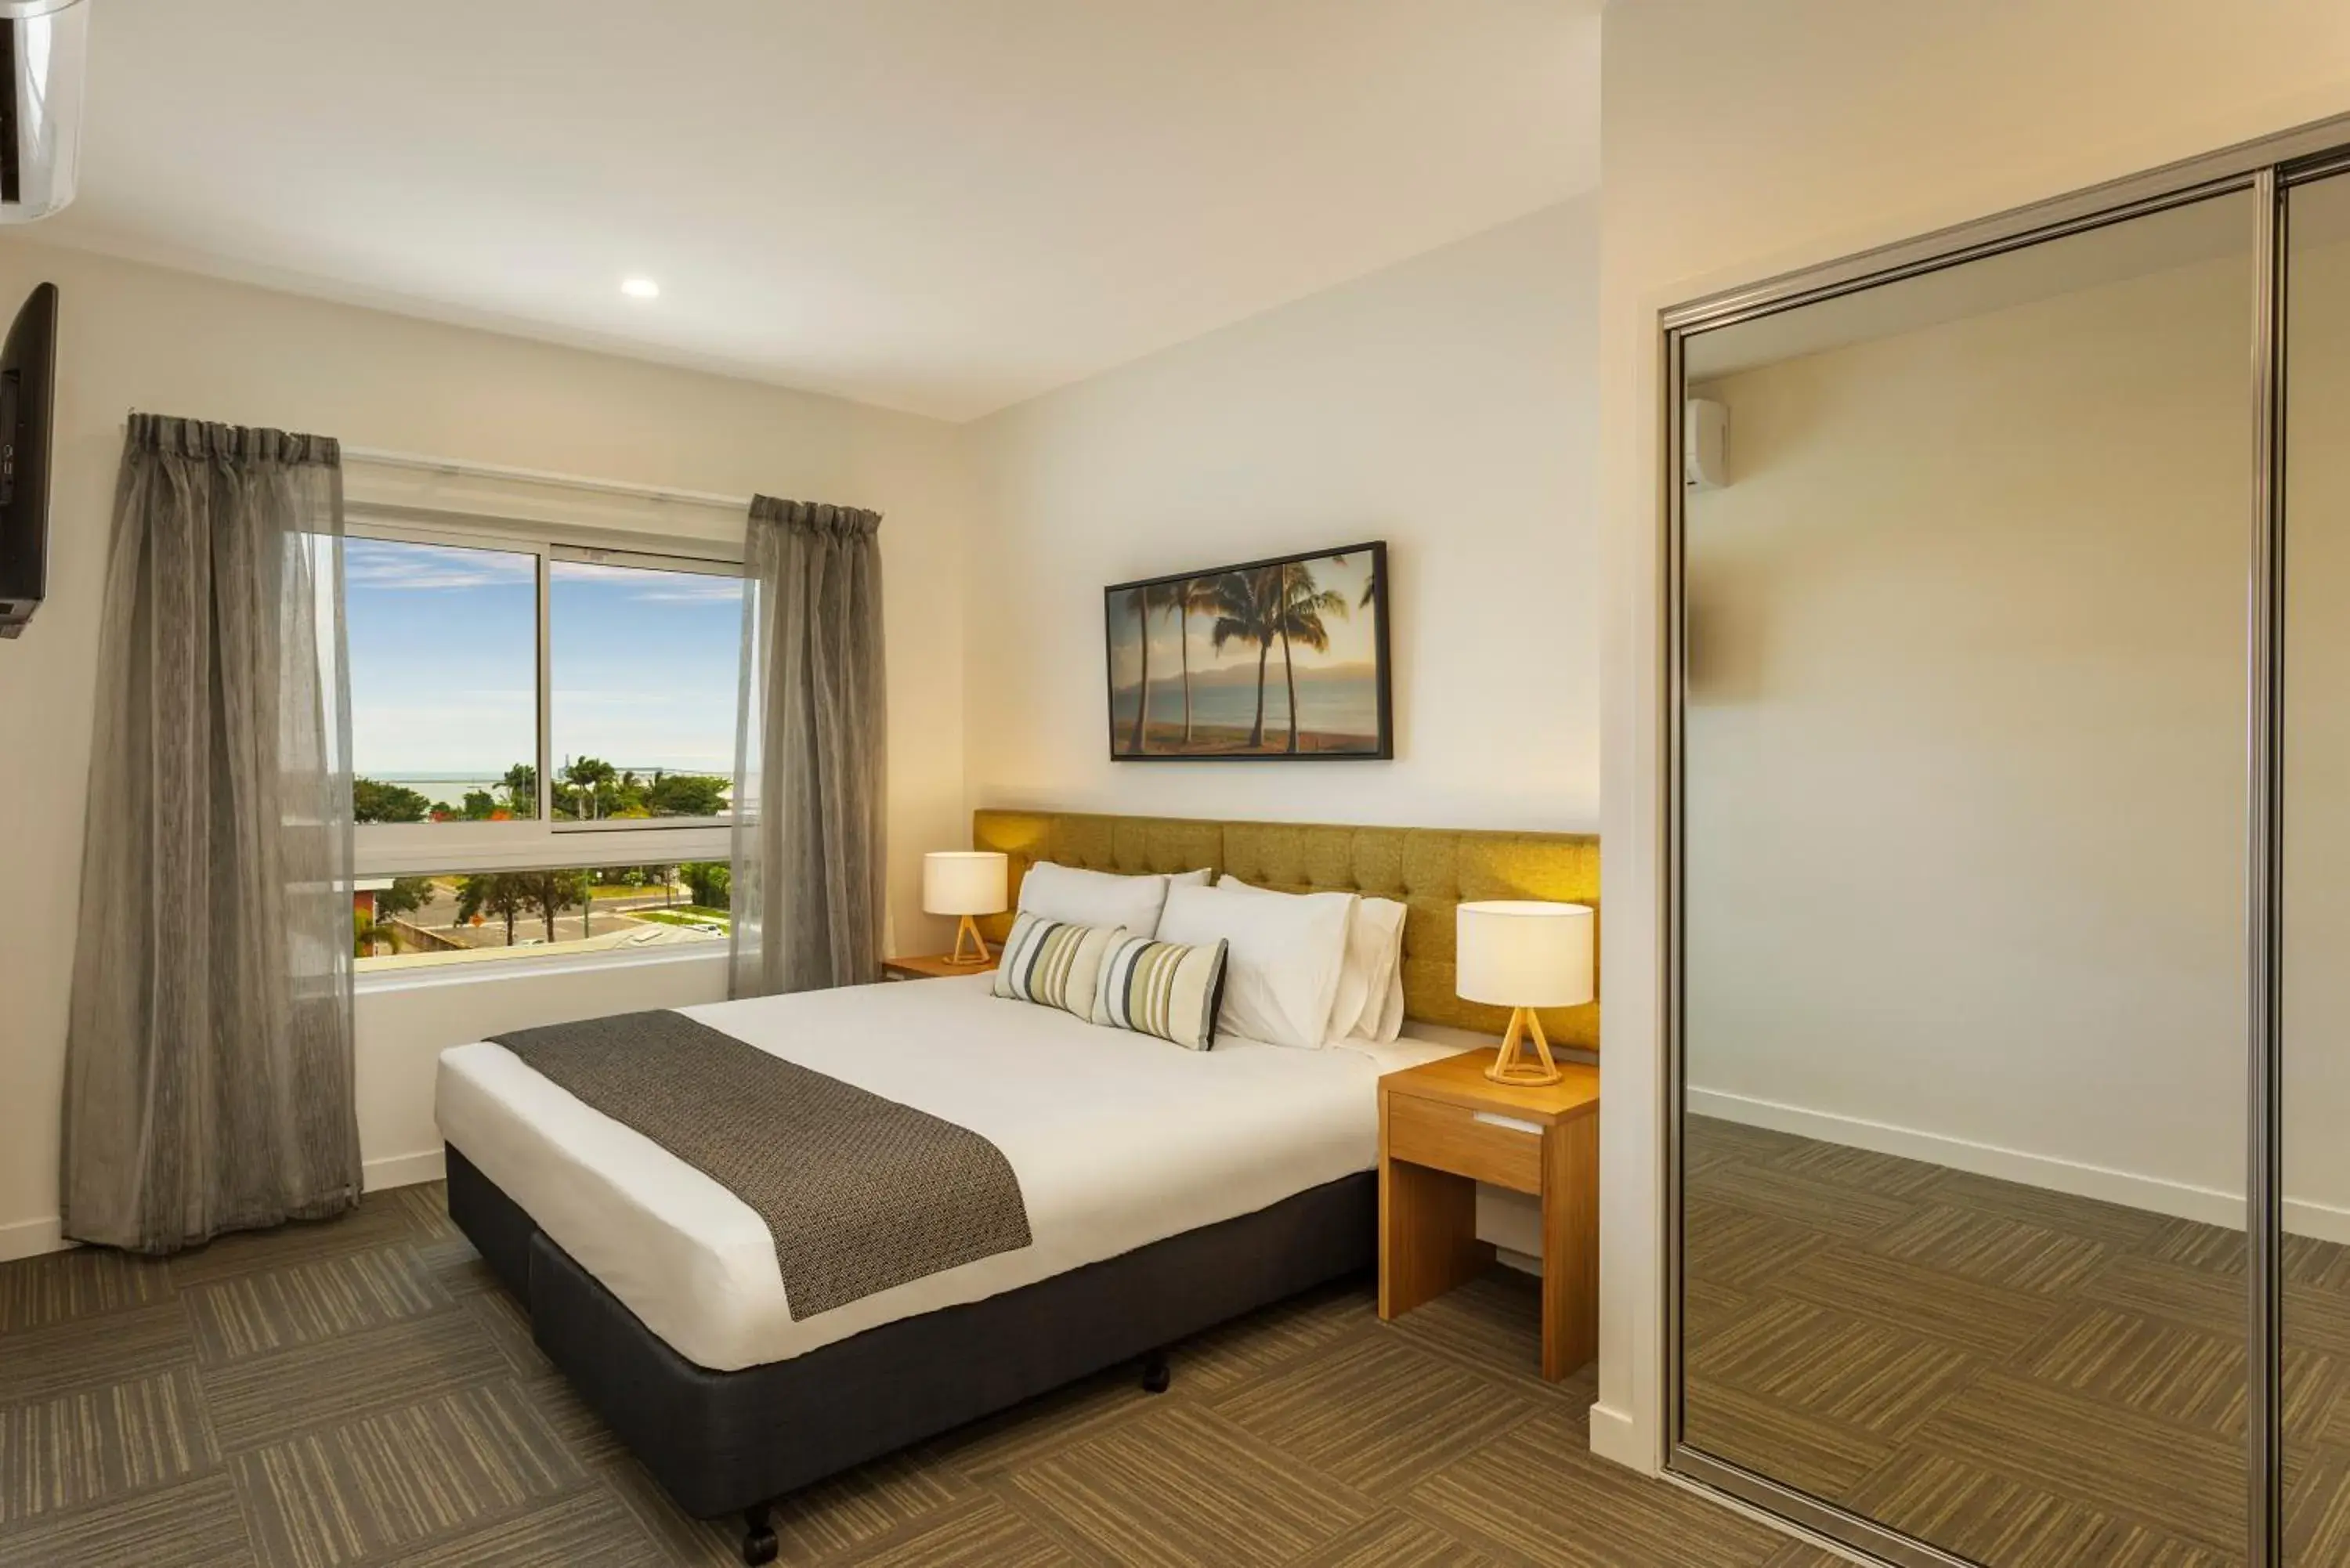 Two-Bedroom Apartment in Quest Townsville on Eyre